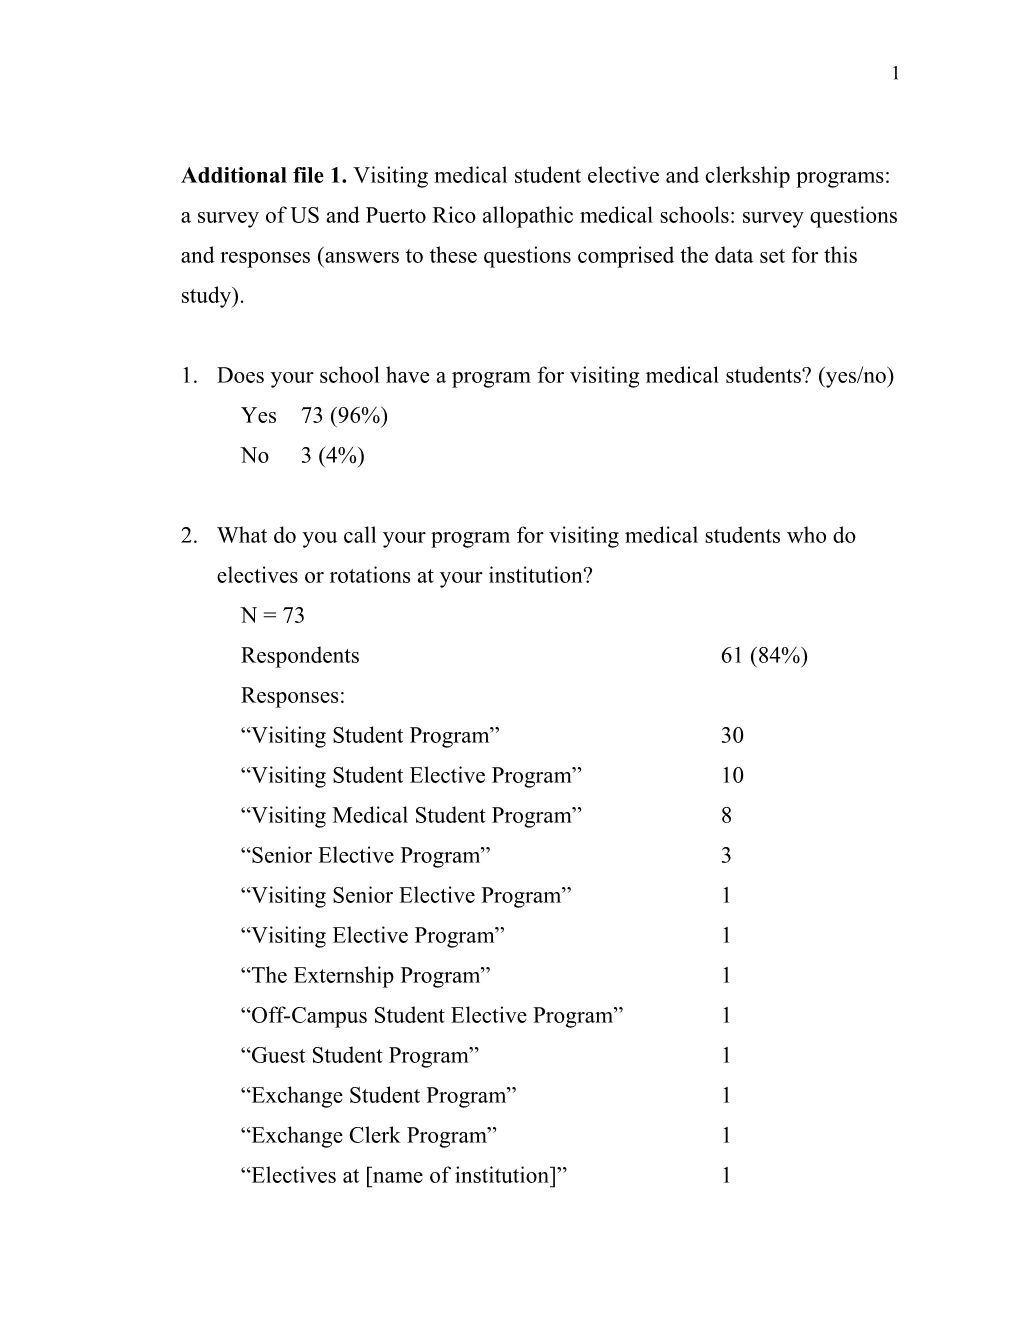 Additional File 1. Visiting Medical Student Elective and Clerkship Programs: a Survey